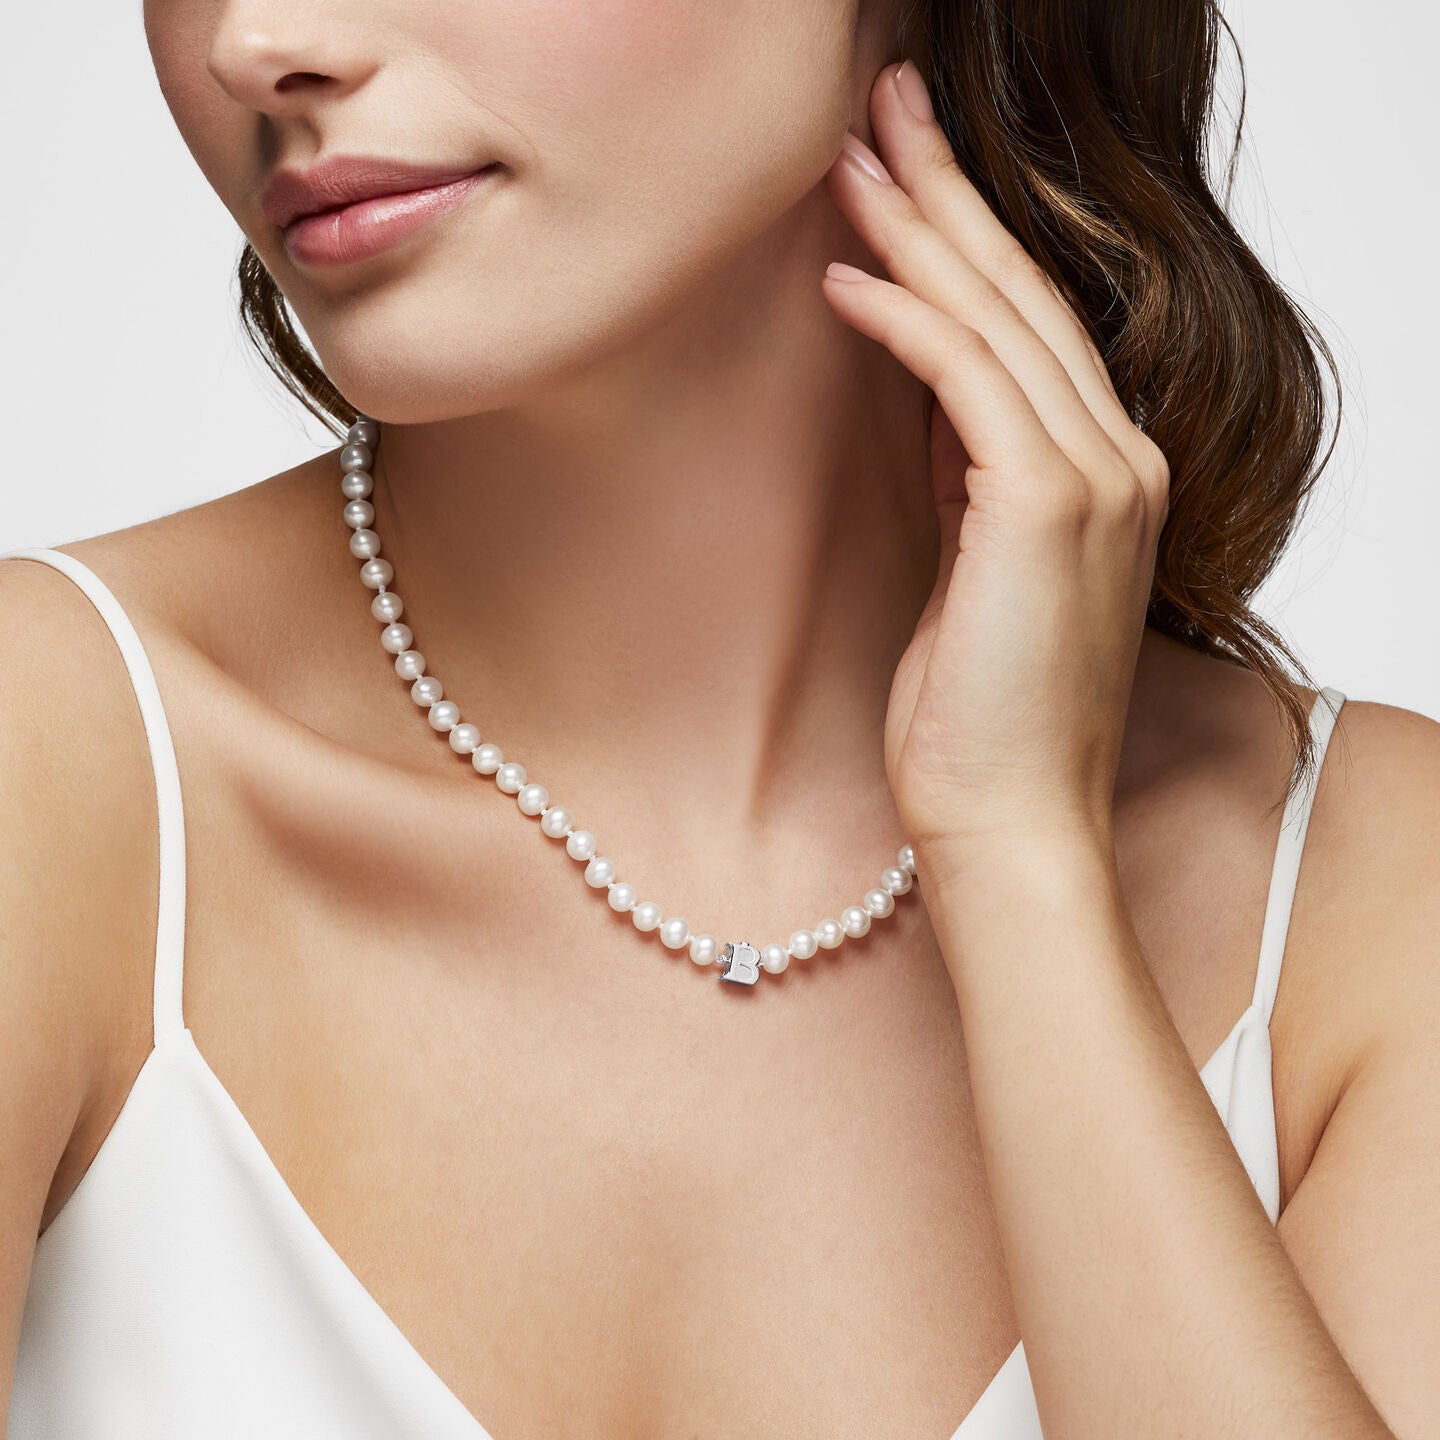 Birks Freshwater Pearl Strand with Silver Clasp